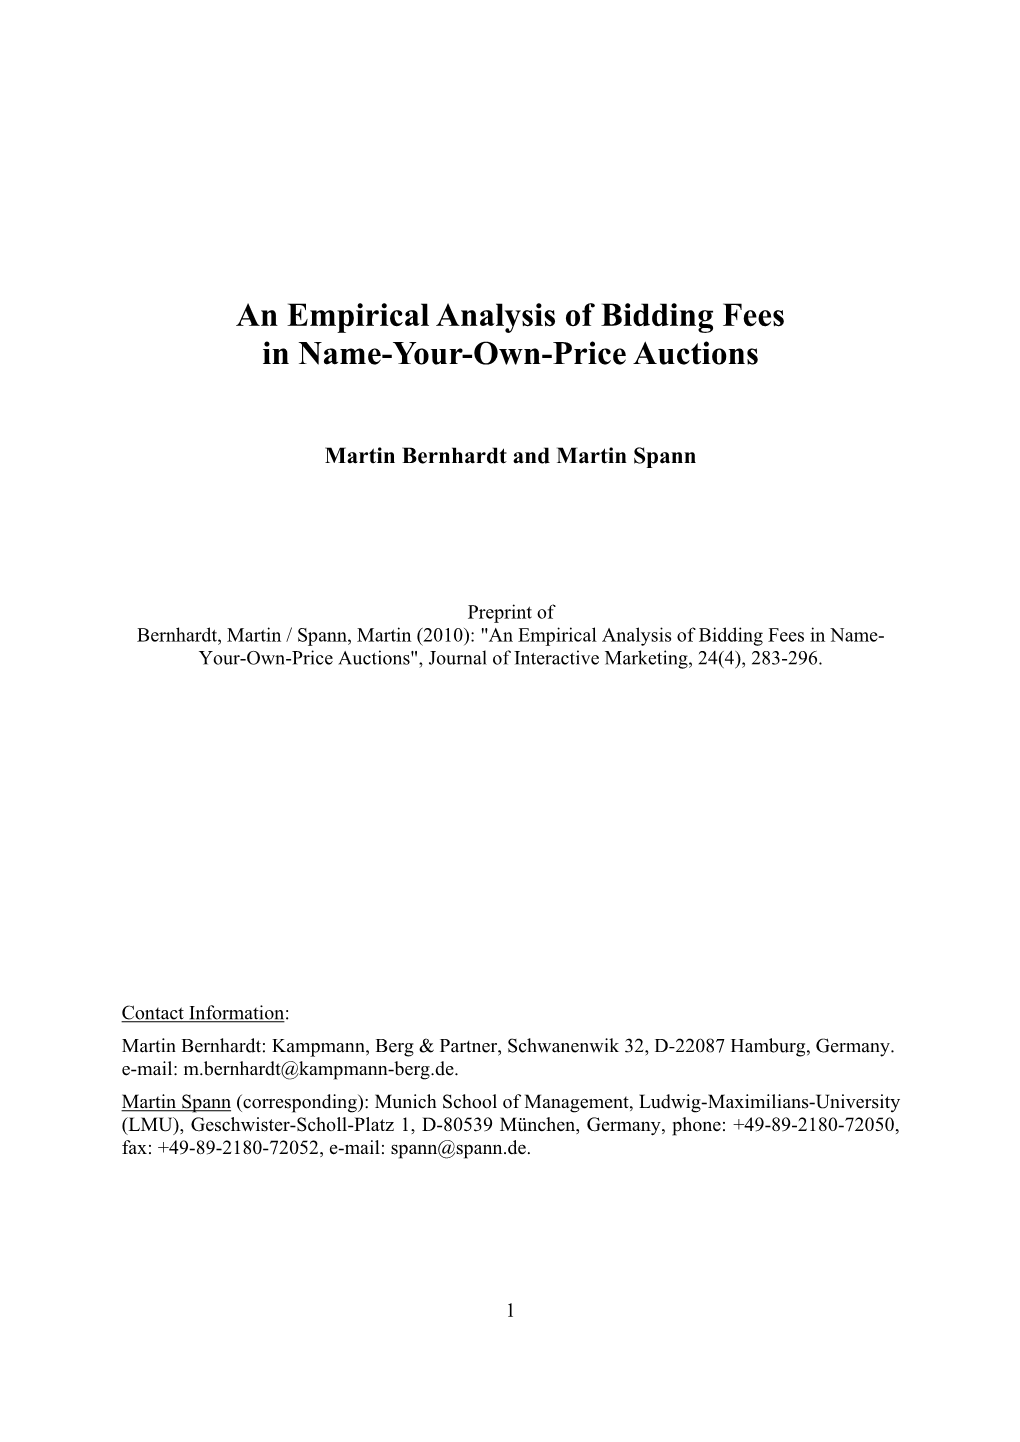 Download: an Empirical Analysis of Bidding Fees in Name-Your-Own